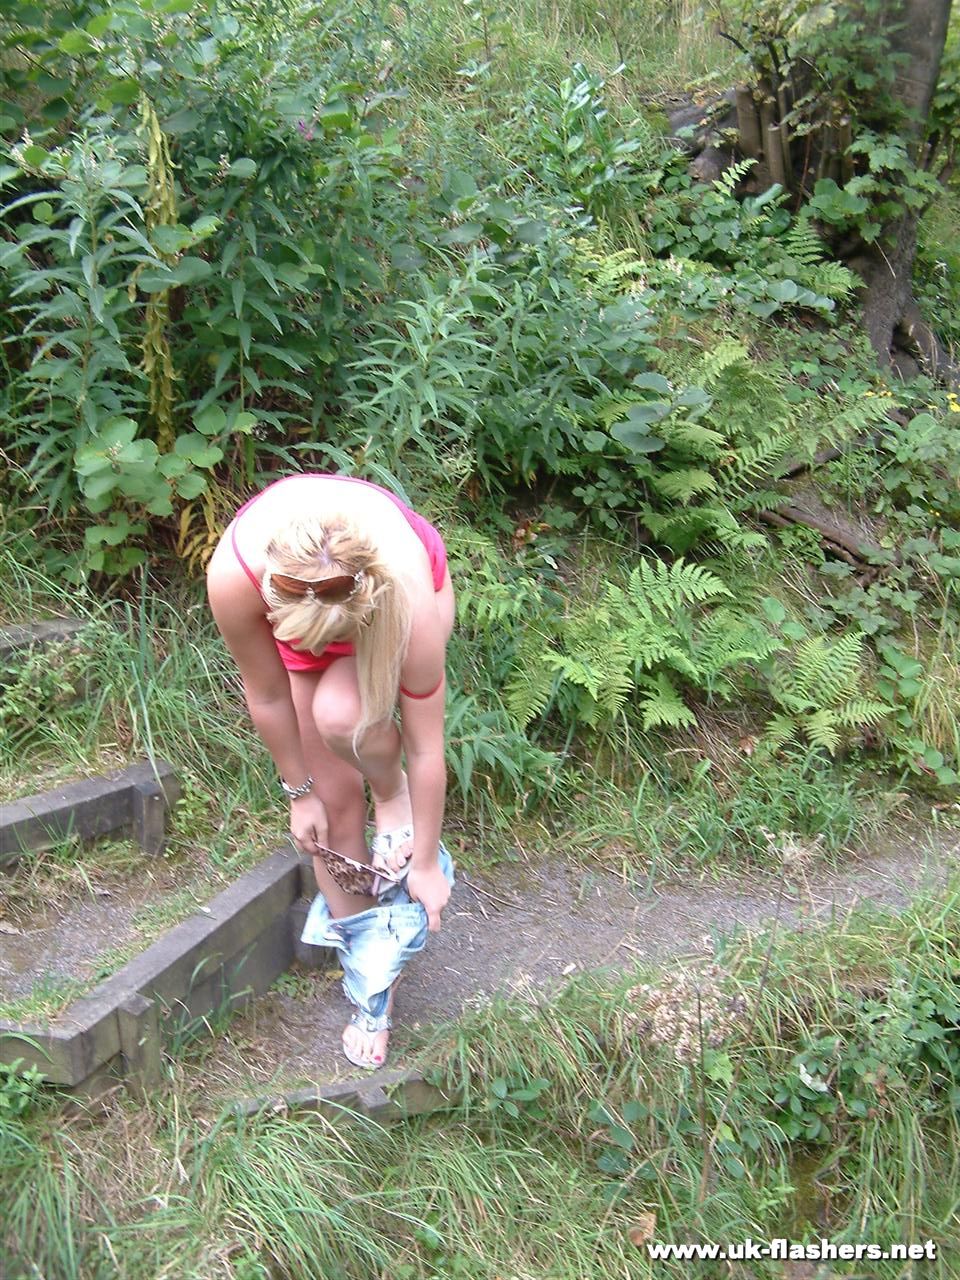 Overweight UK female with blonde hair strips naked on a popular walking trails 色情照片 #428197329 | UK Flashers Pics, Lena Leigh, Public, 手机色情